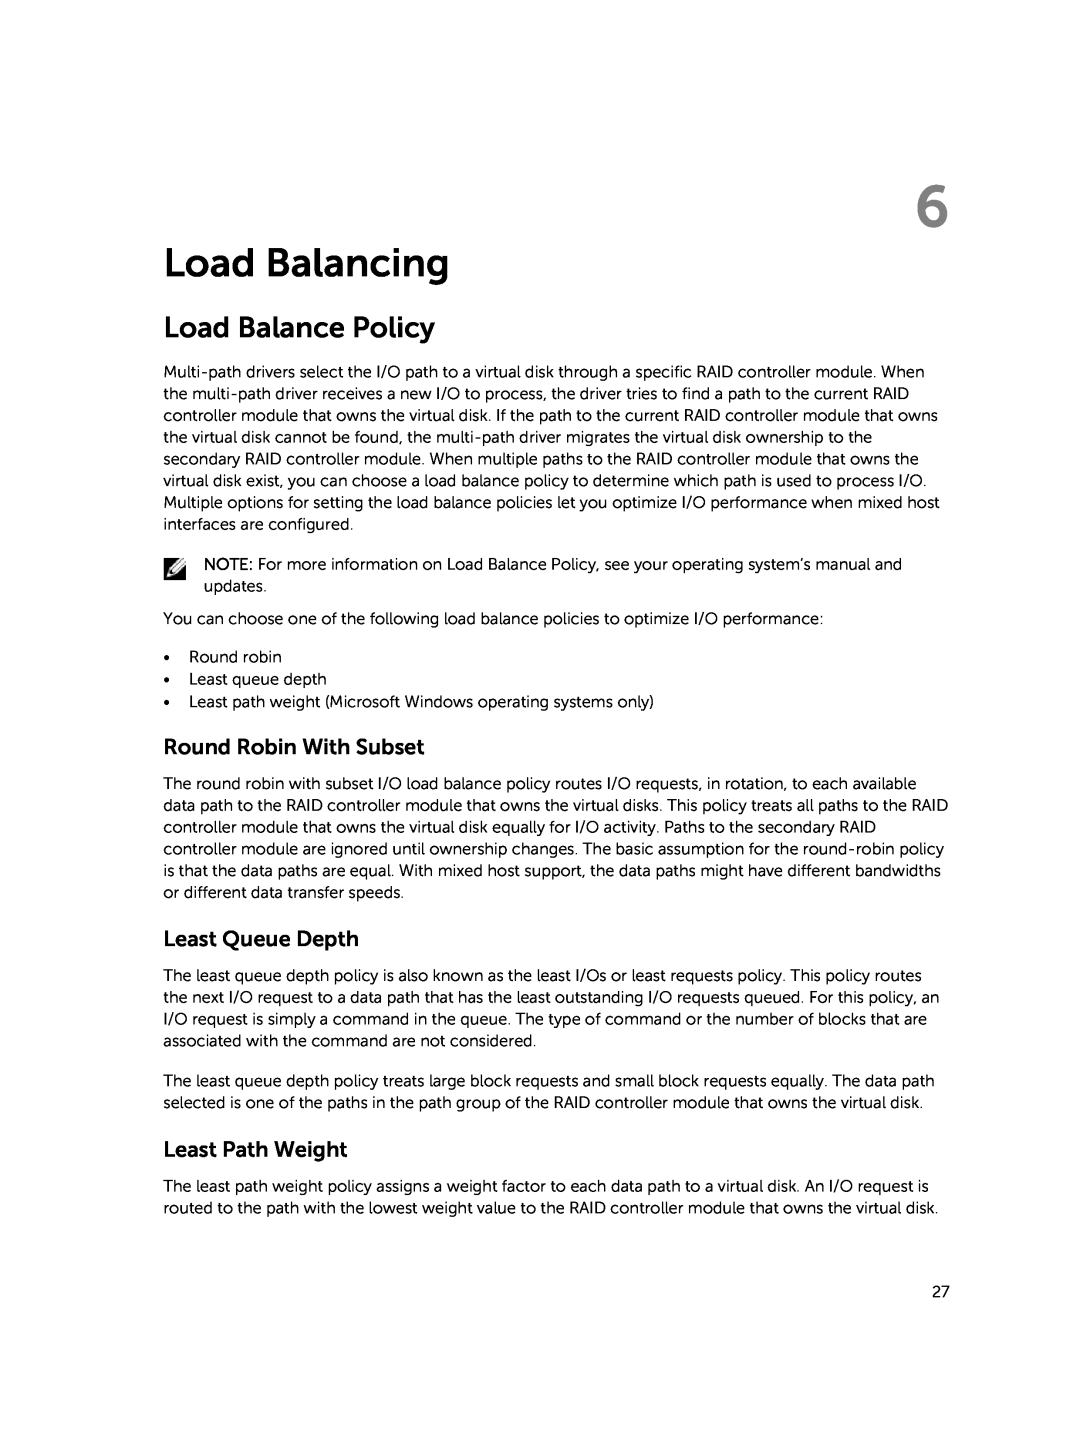 Dell MD3460 manual Load Balancing, Load Balance Policy, Round Robin With Subset, Least Queue Depth, Least Path Weight 